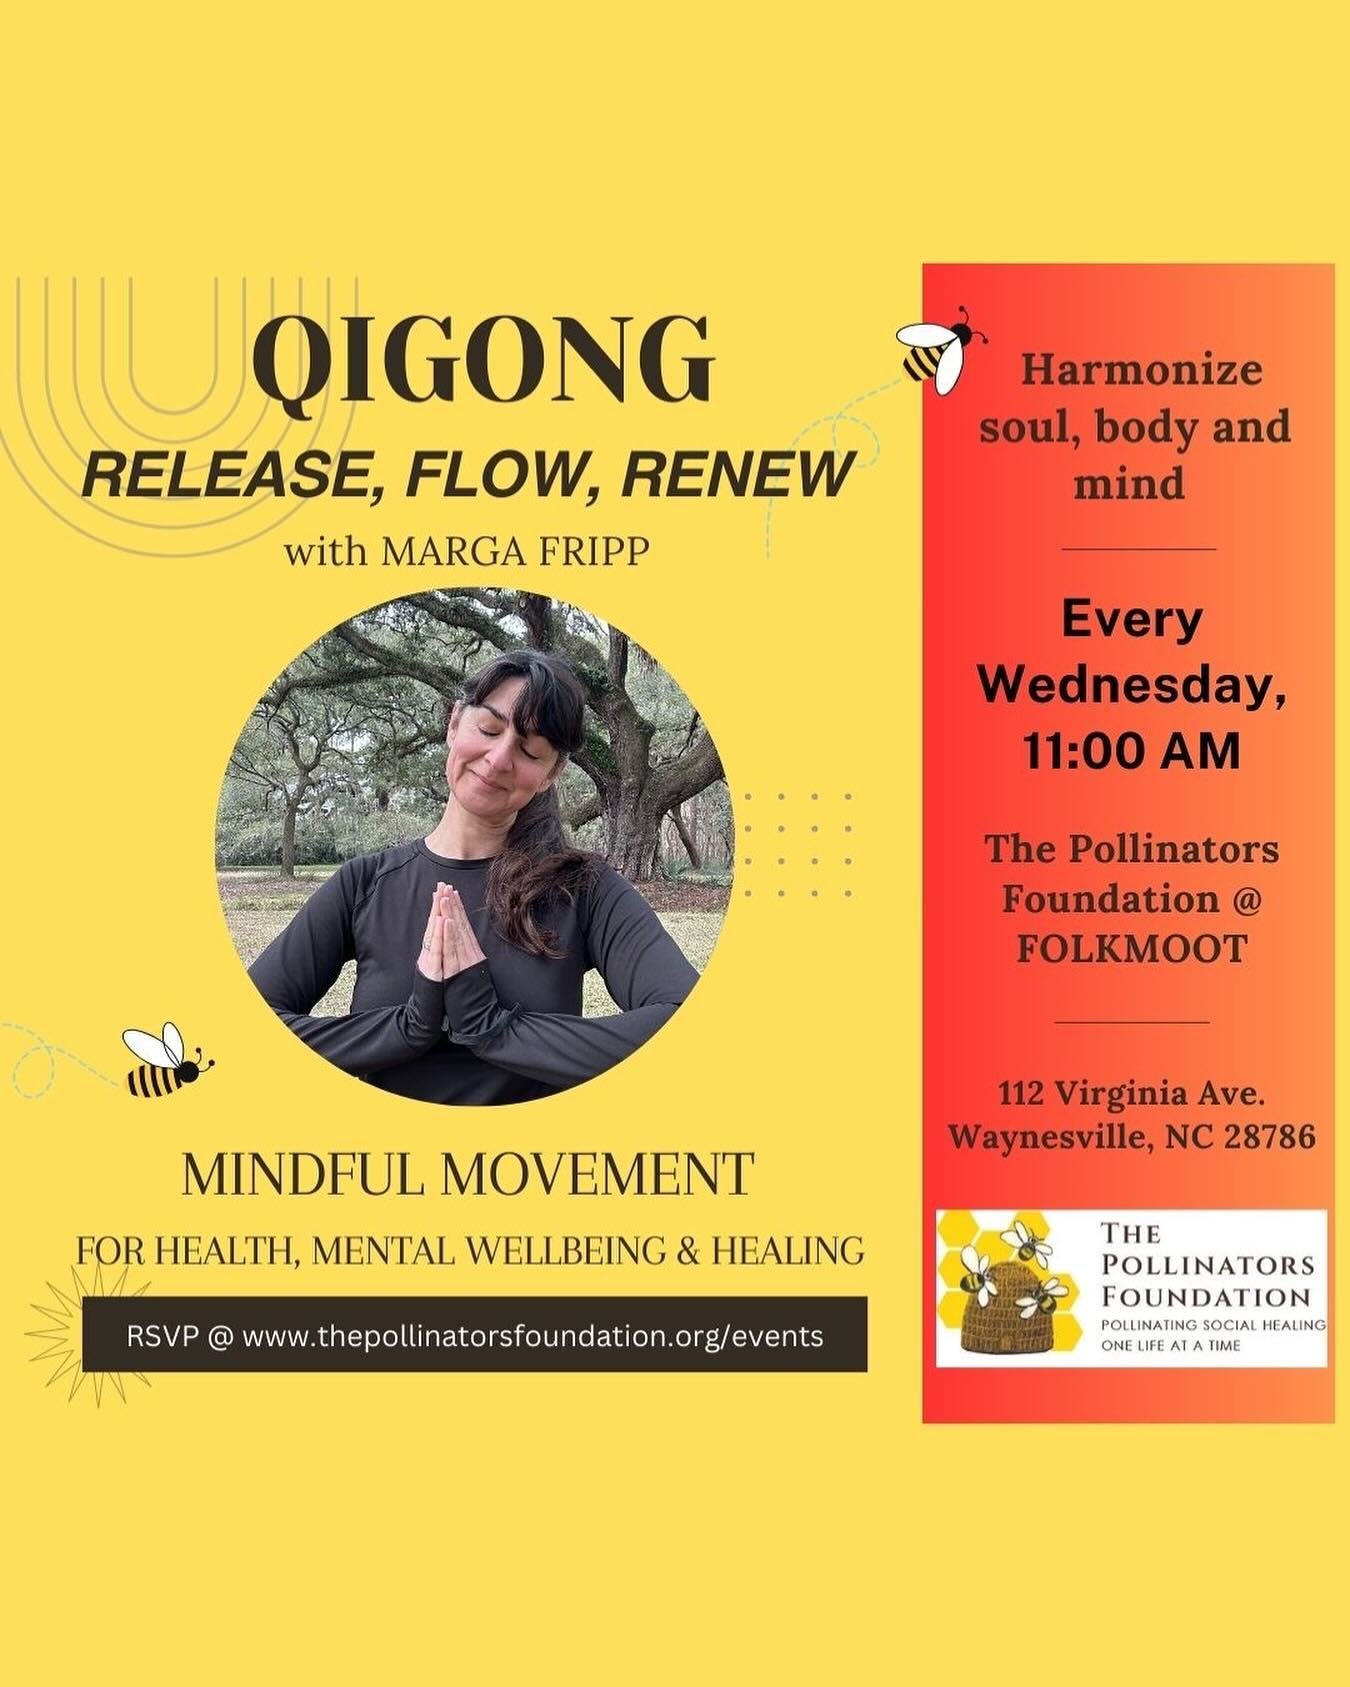 🌳 Every Wednesday at 11 am at The Pollinators Foundation at Folkmoot USA, we offer QIGONG Classes, a Mindful Movement practice for Better Health, Mental Wellbeing and Healing for All. Qigong is &ldquo;the mother&rdquo; of Tai Chi, a moving meditatio